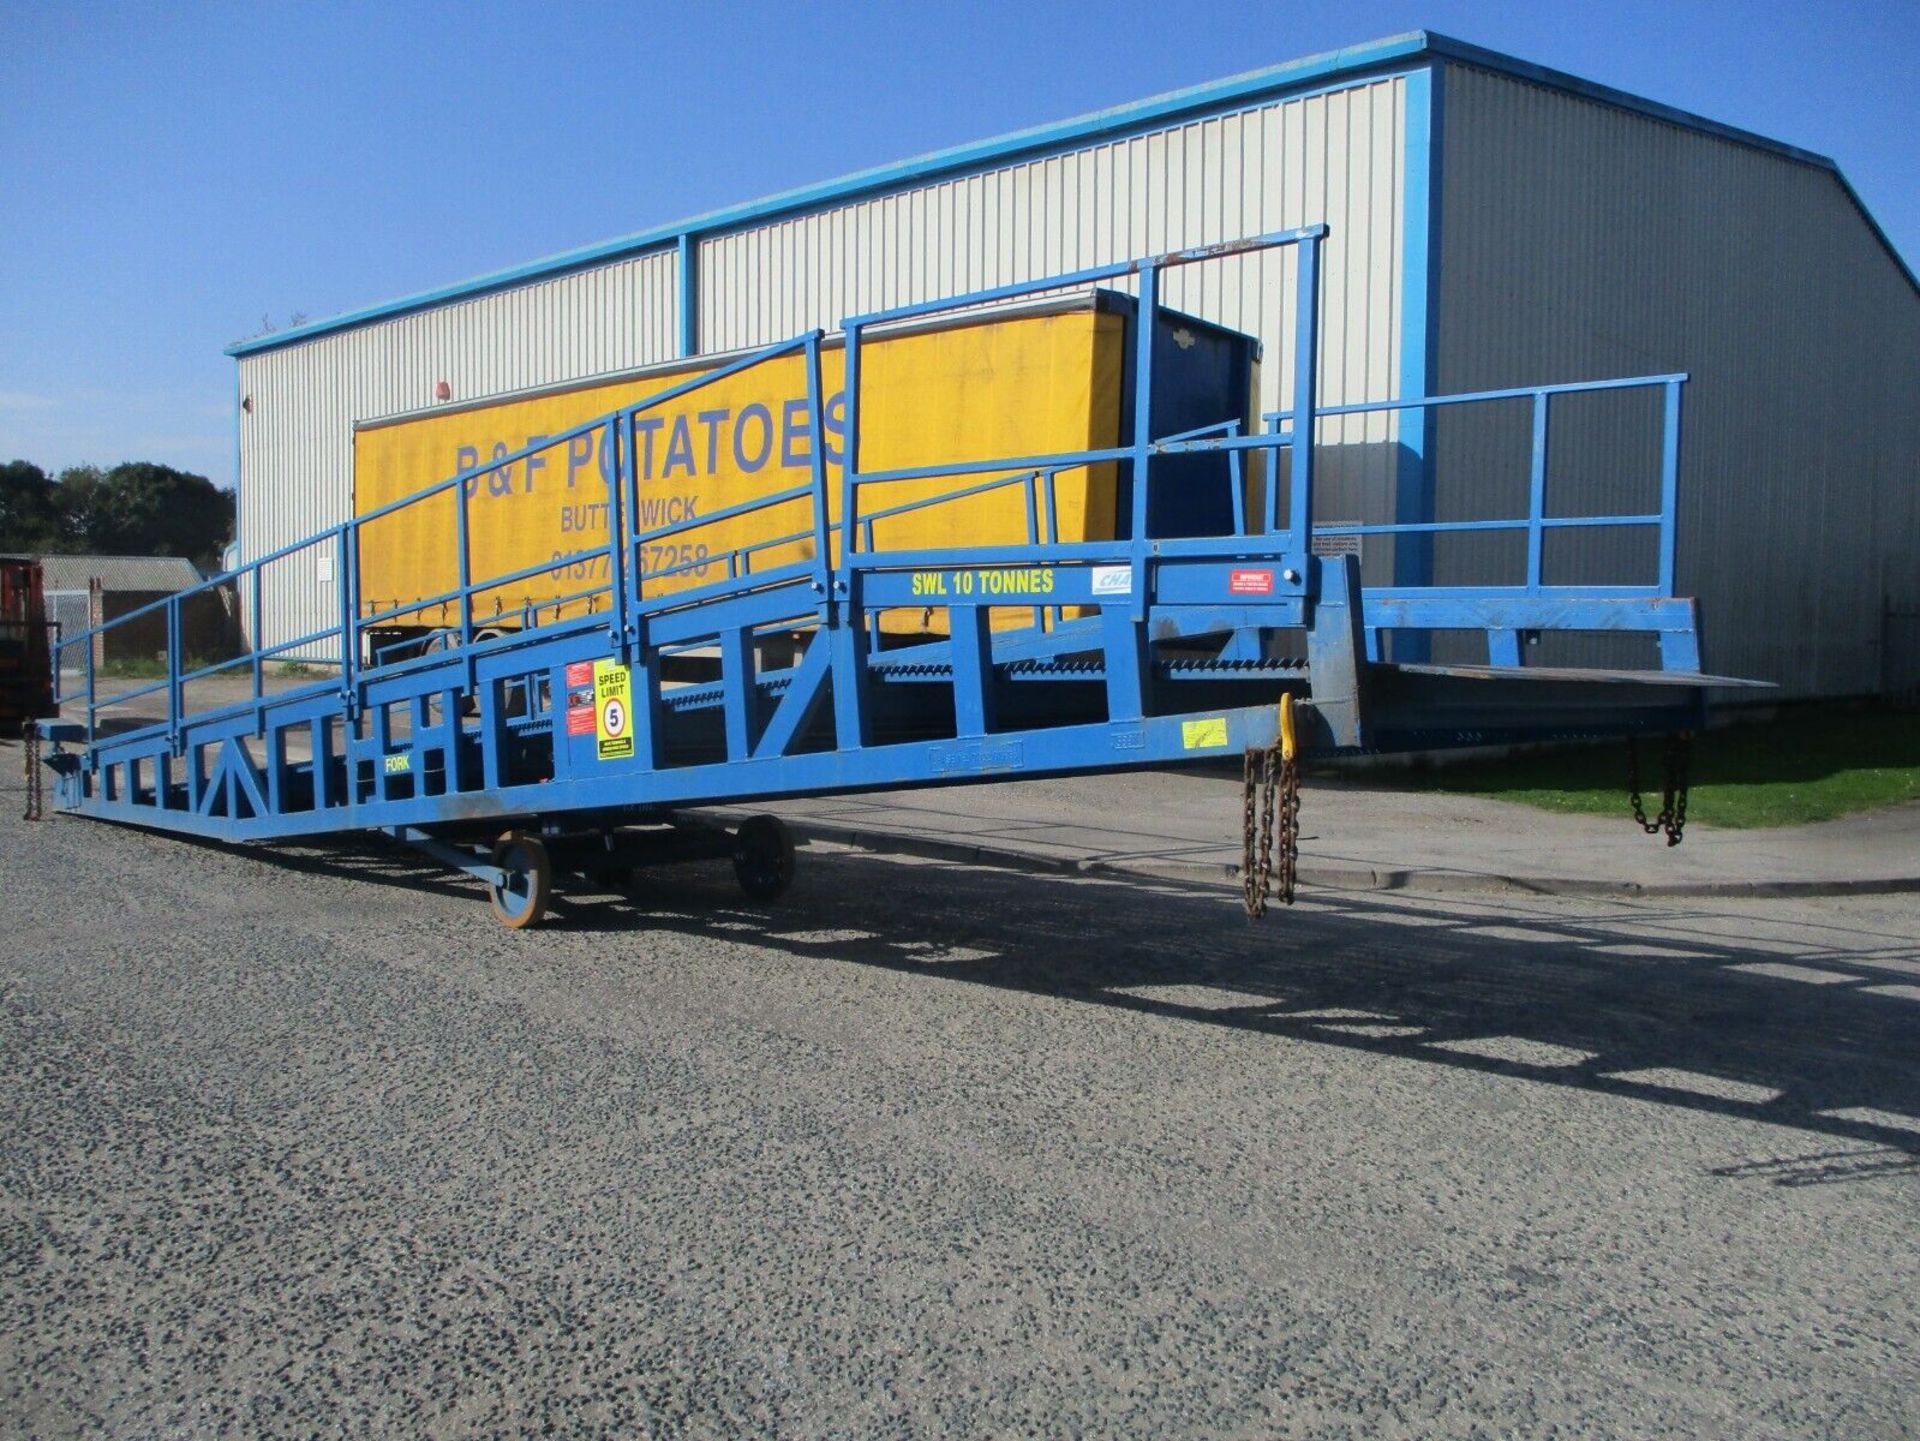 2019 10,000 KG CAPACITY CHASE TITAN 10 CONTAINER LOADING RAMP - Image 9 of 11